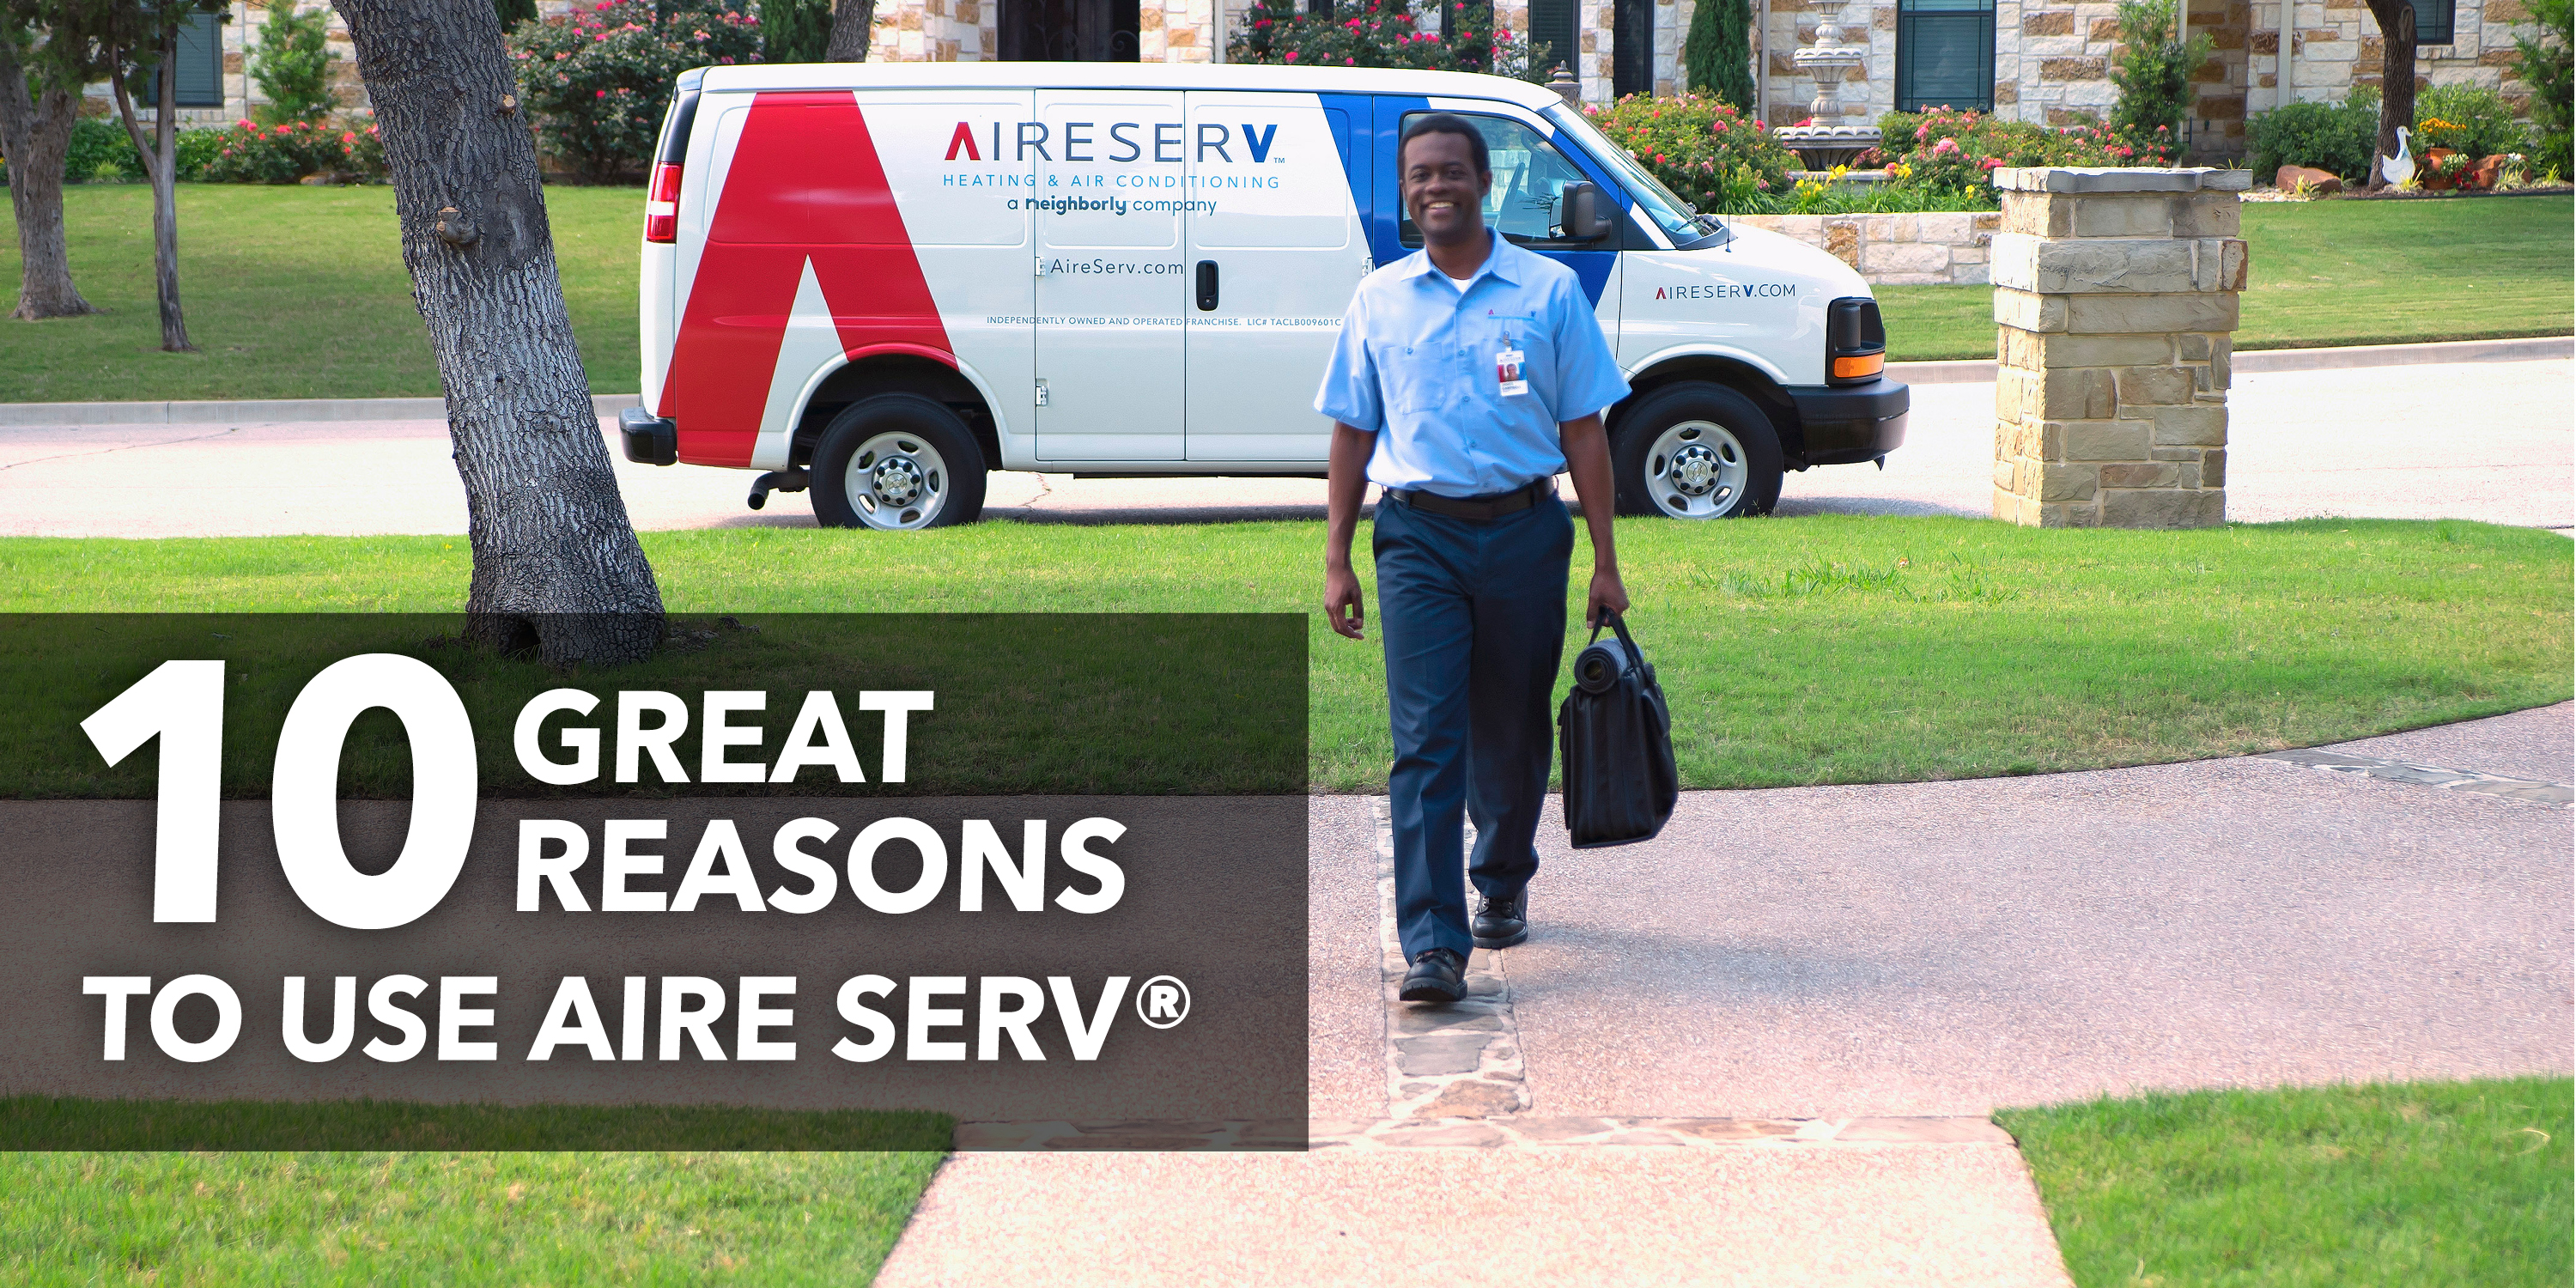 Aire Serv tech and van with text: 10 great reasons to use Aire Serv©"